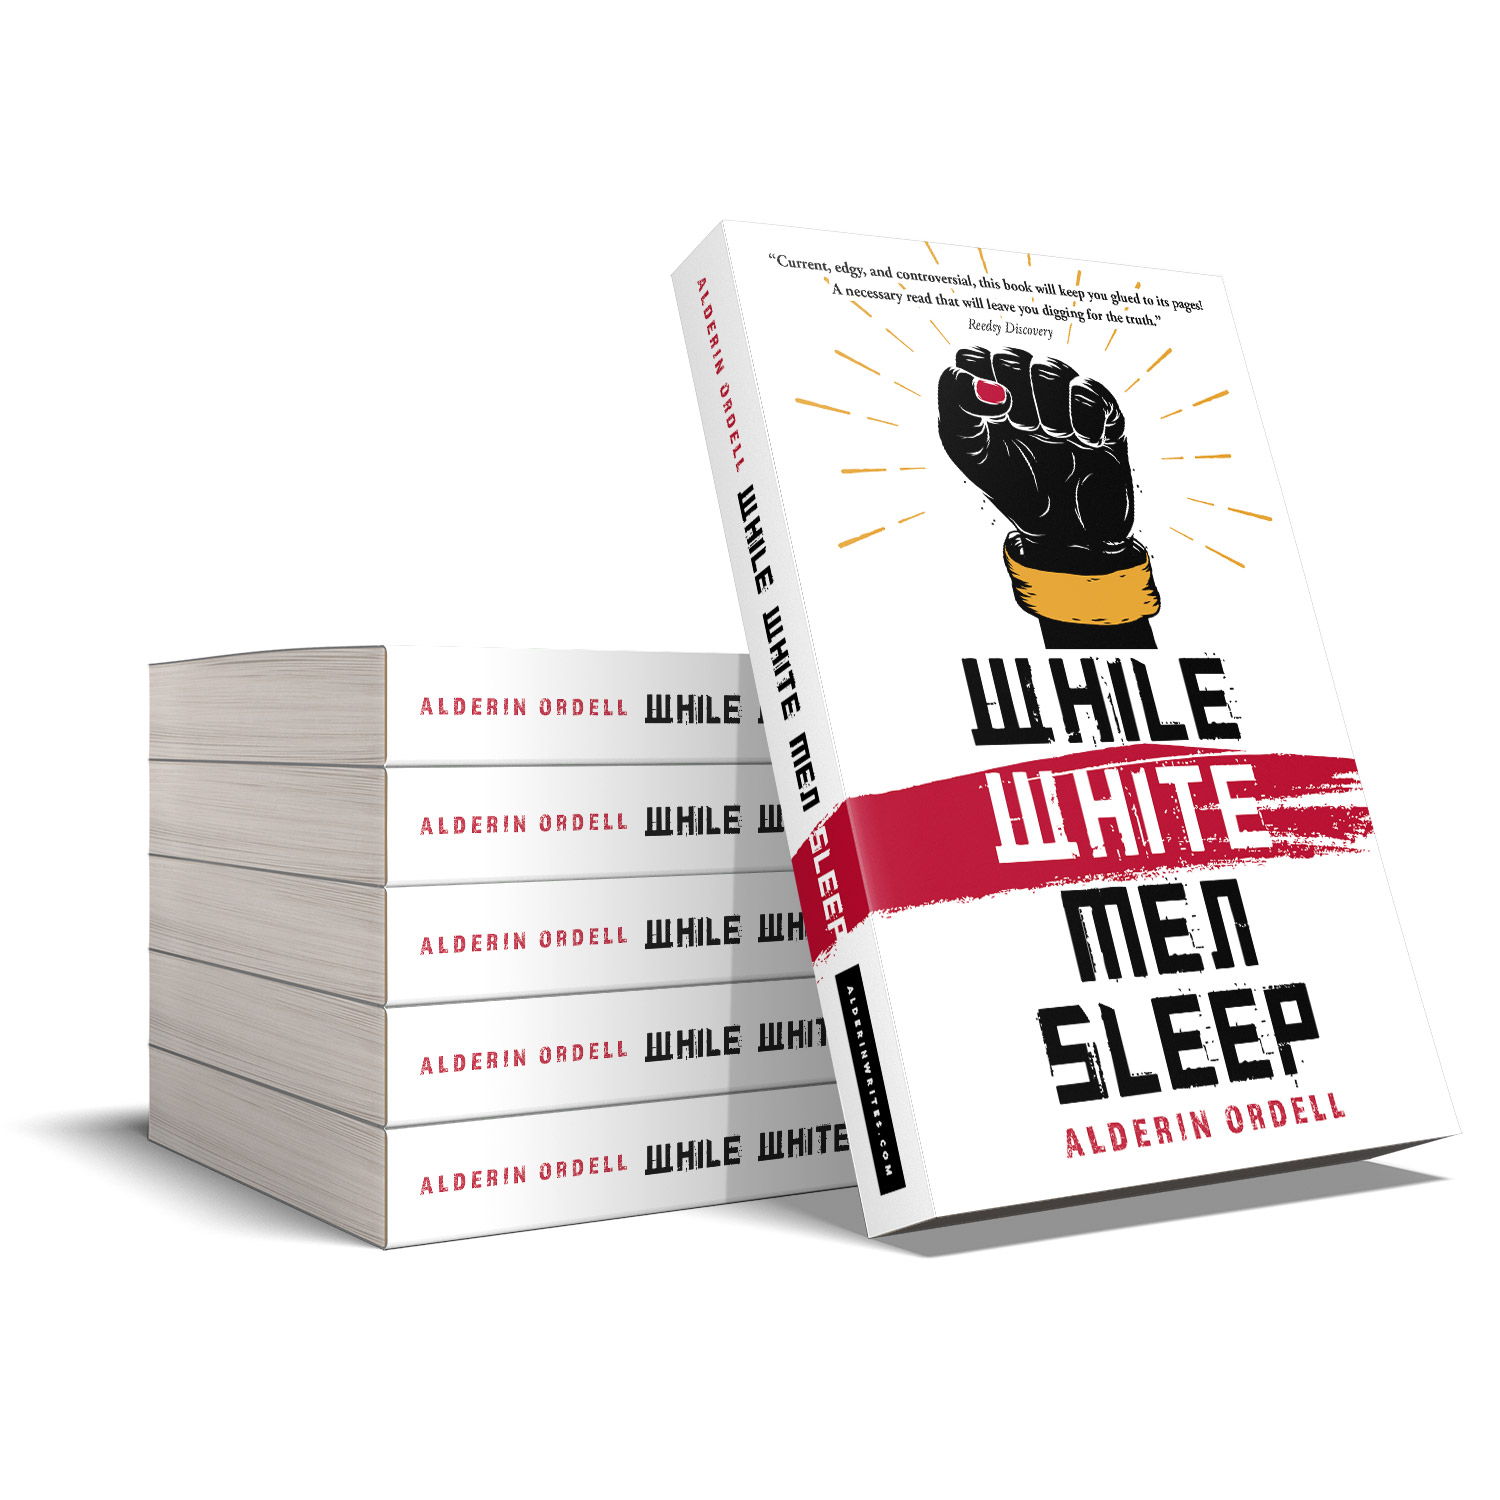 'While White Men Sleep' is a provocative narrative fiction set against the background of BLM and the Trump presidency . The author is Alderin Ordell. The book cover design and interior formatting are by Mark Thomas. To learn more about what Mark could do for your book, please visit coverness.com